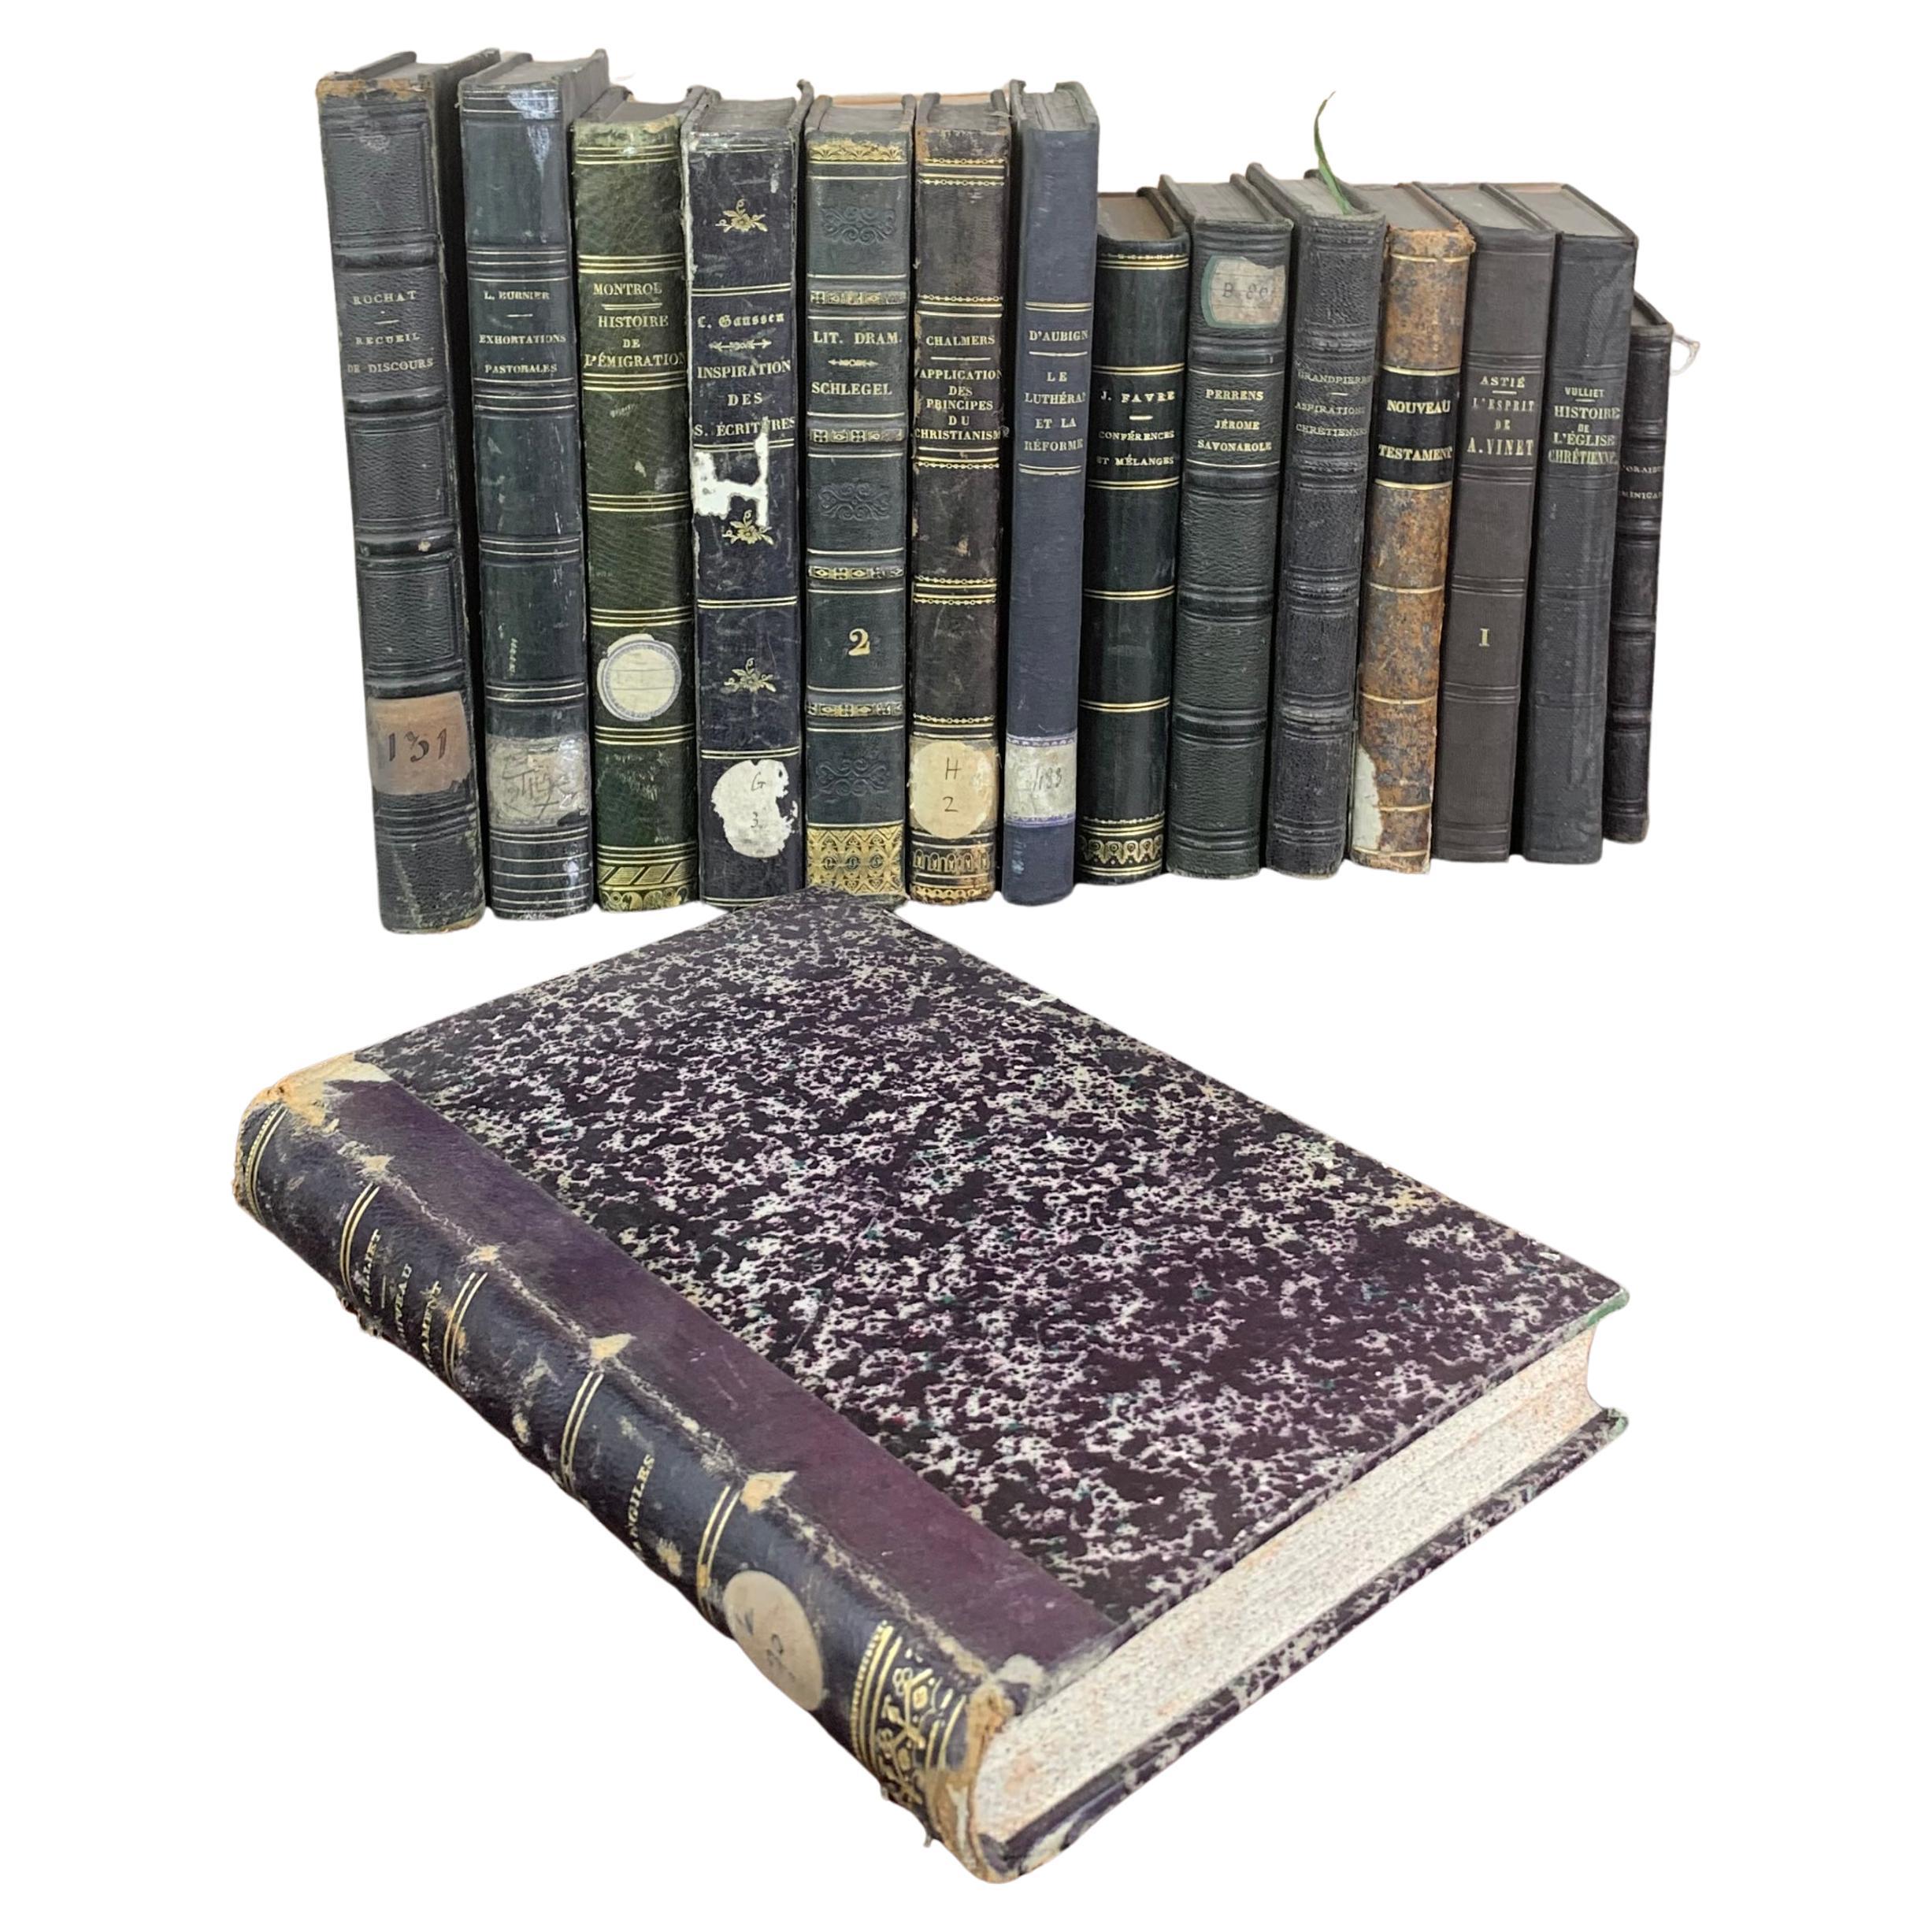 Set of Old Bound Books from 19th Century